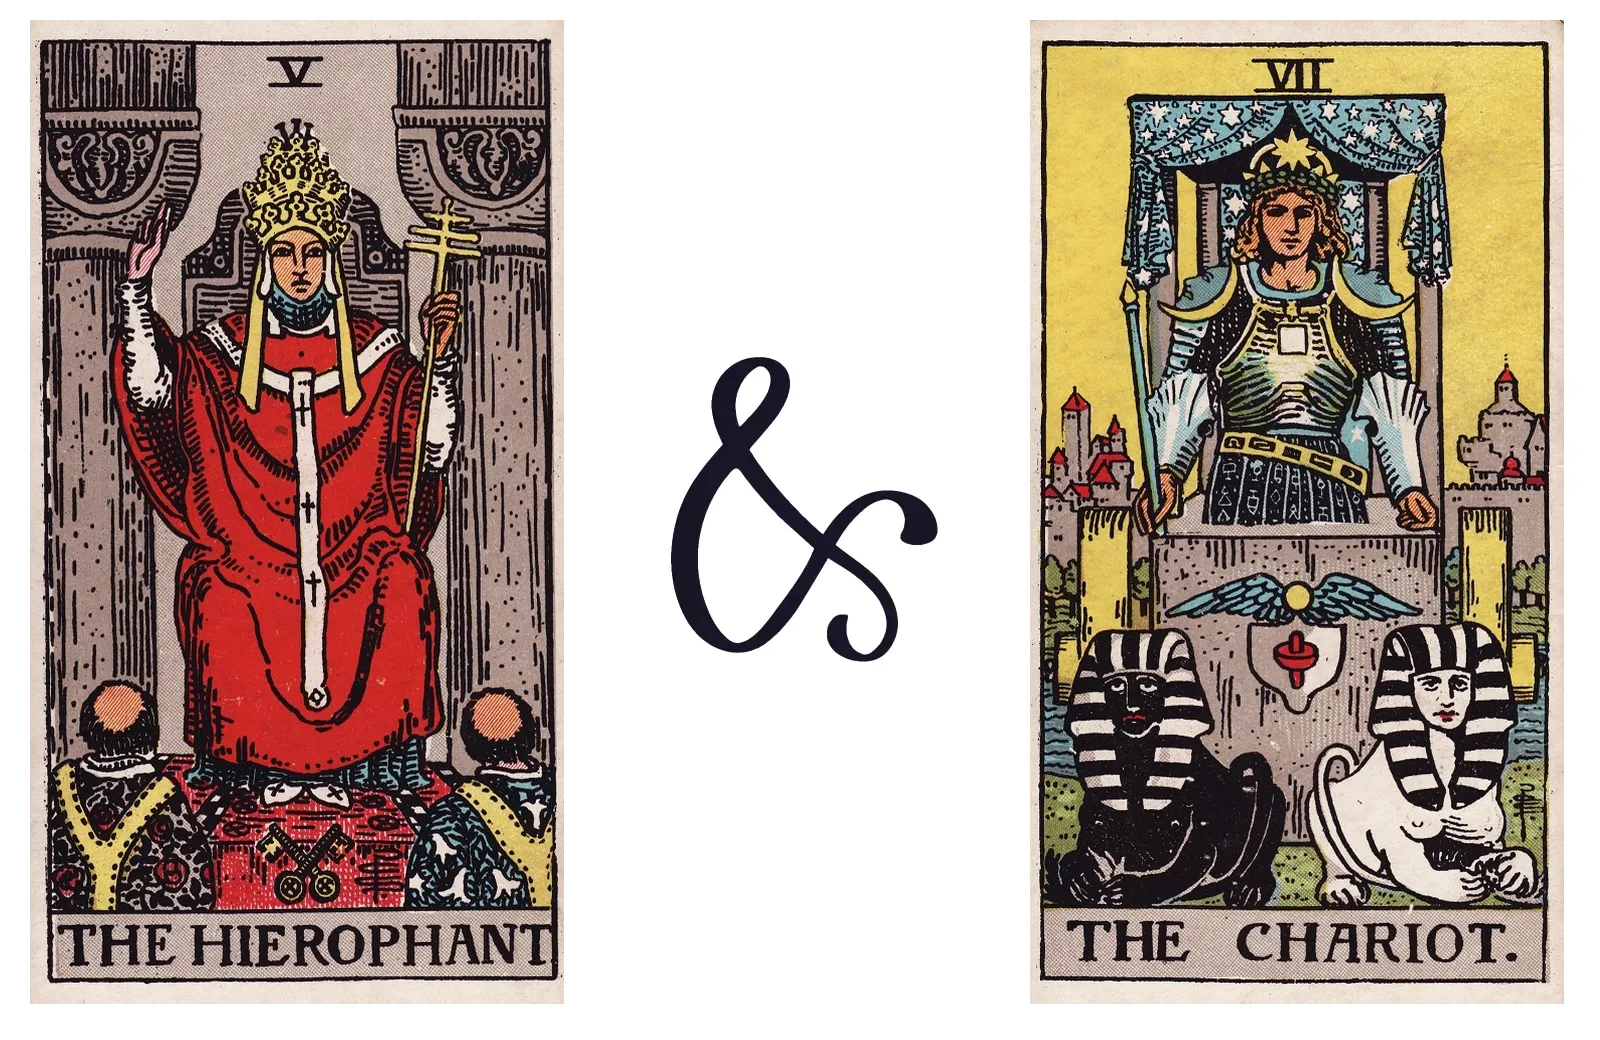 The Hierophant and The Chariot